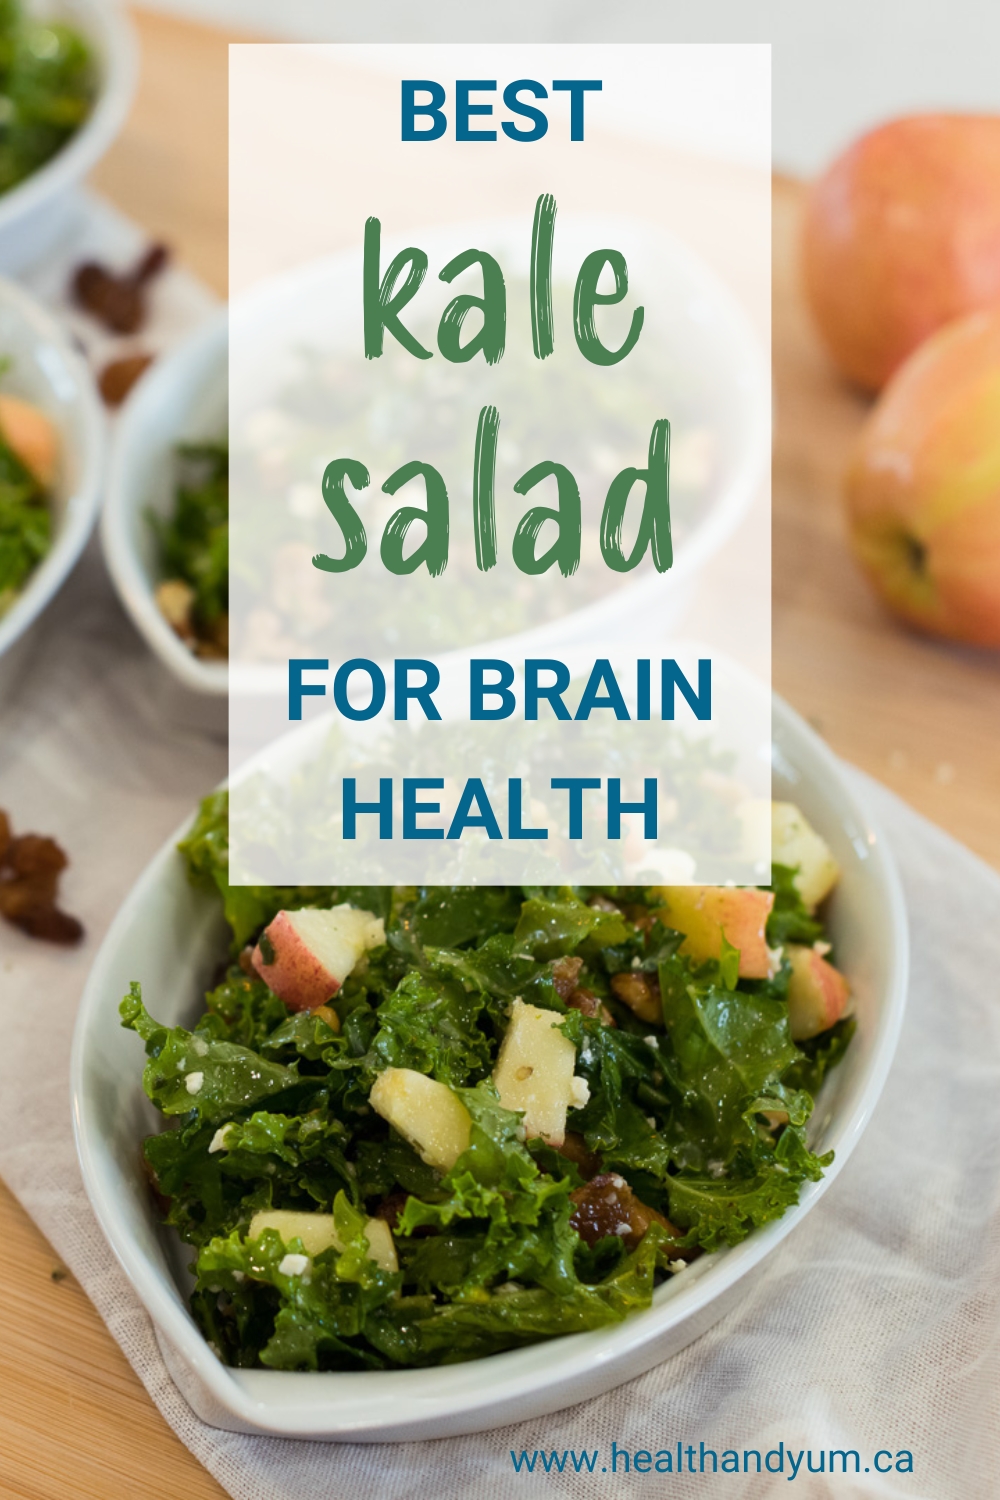 Gluten free salad idea, Kale salad, Summer salad, Summer party side dishes, kale recipes, Healthy salad, Health and Yum food blog, Health and Yum blogger, foods for brain health
